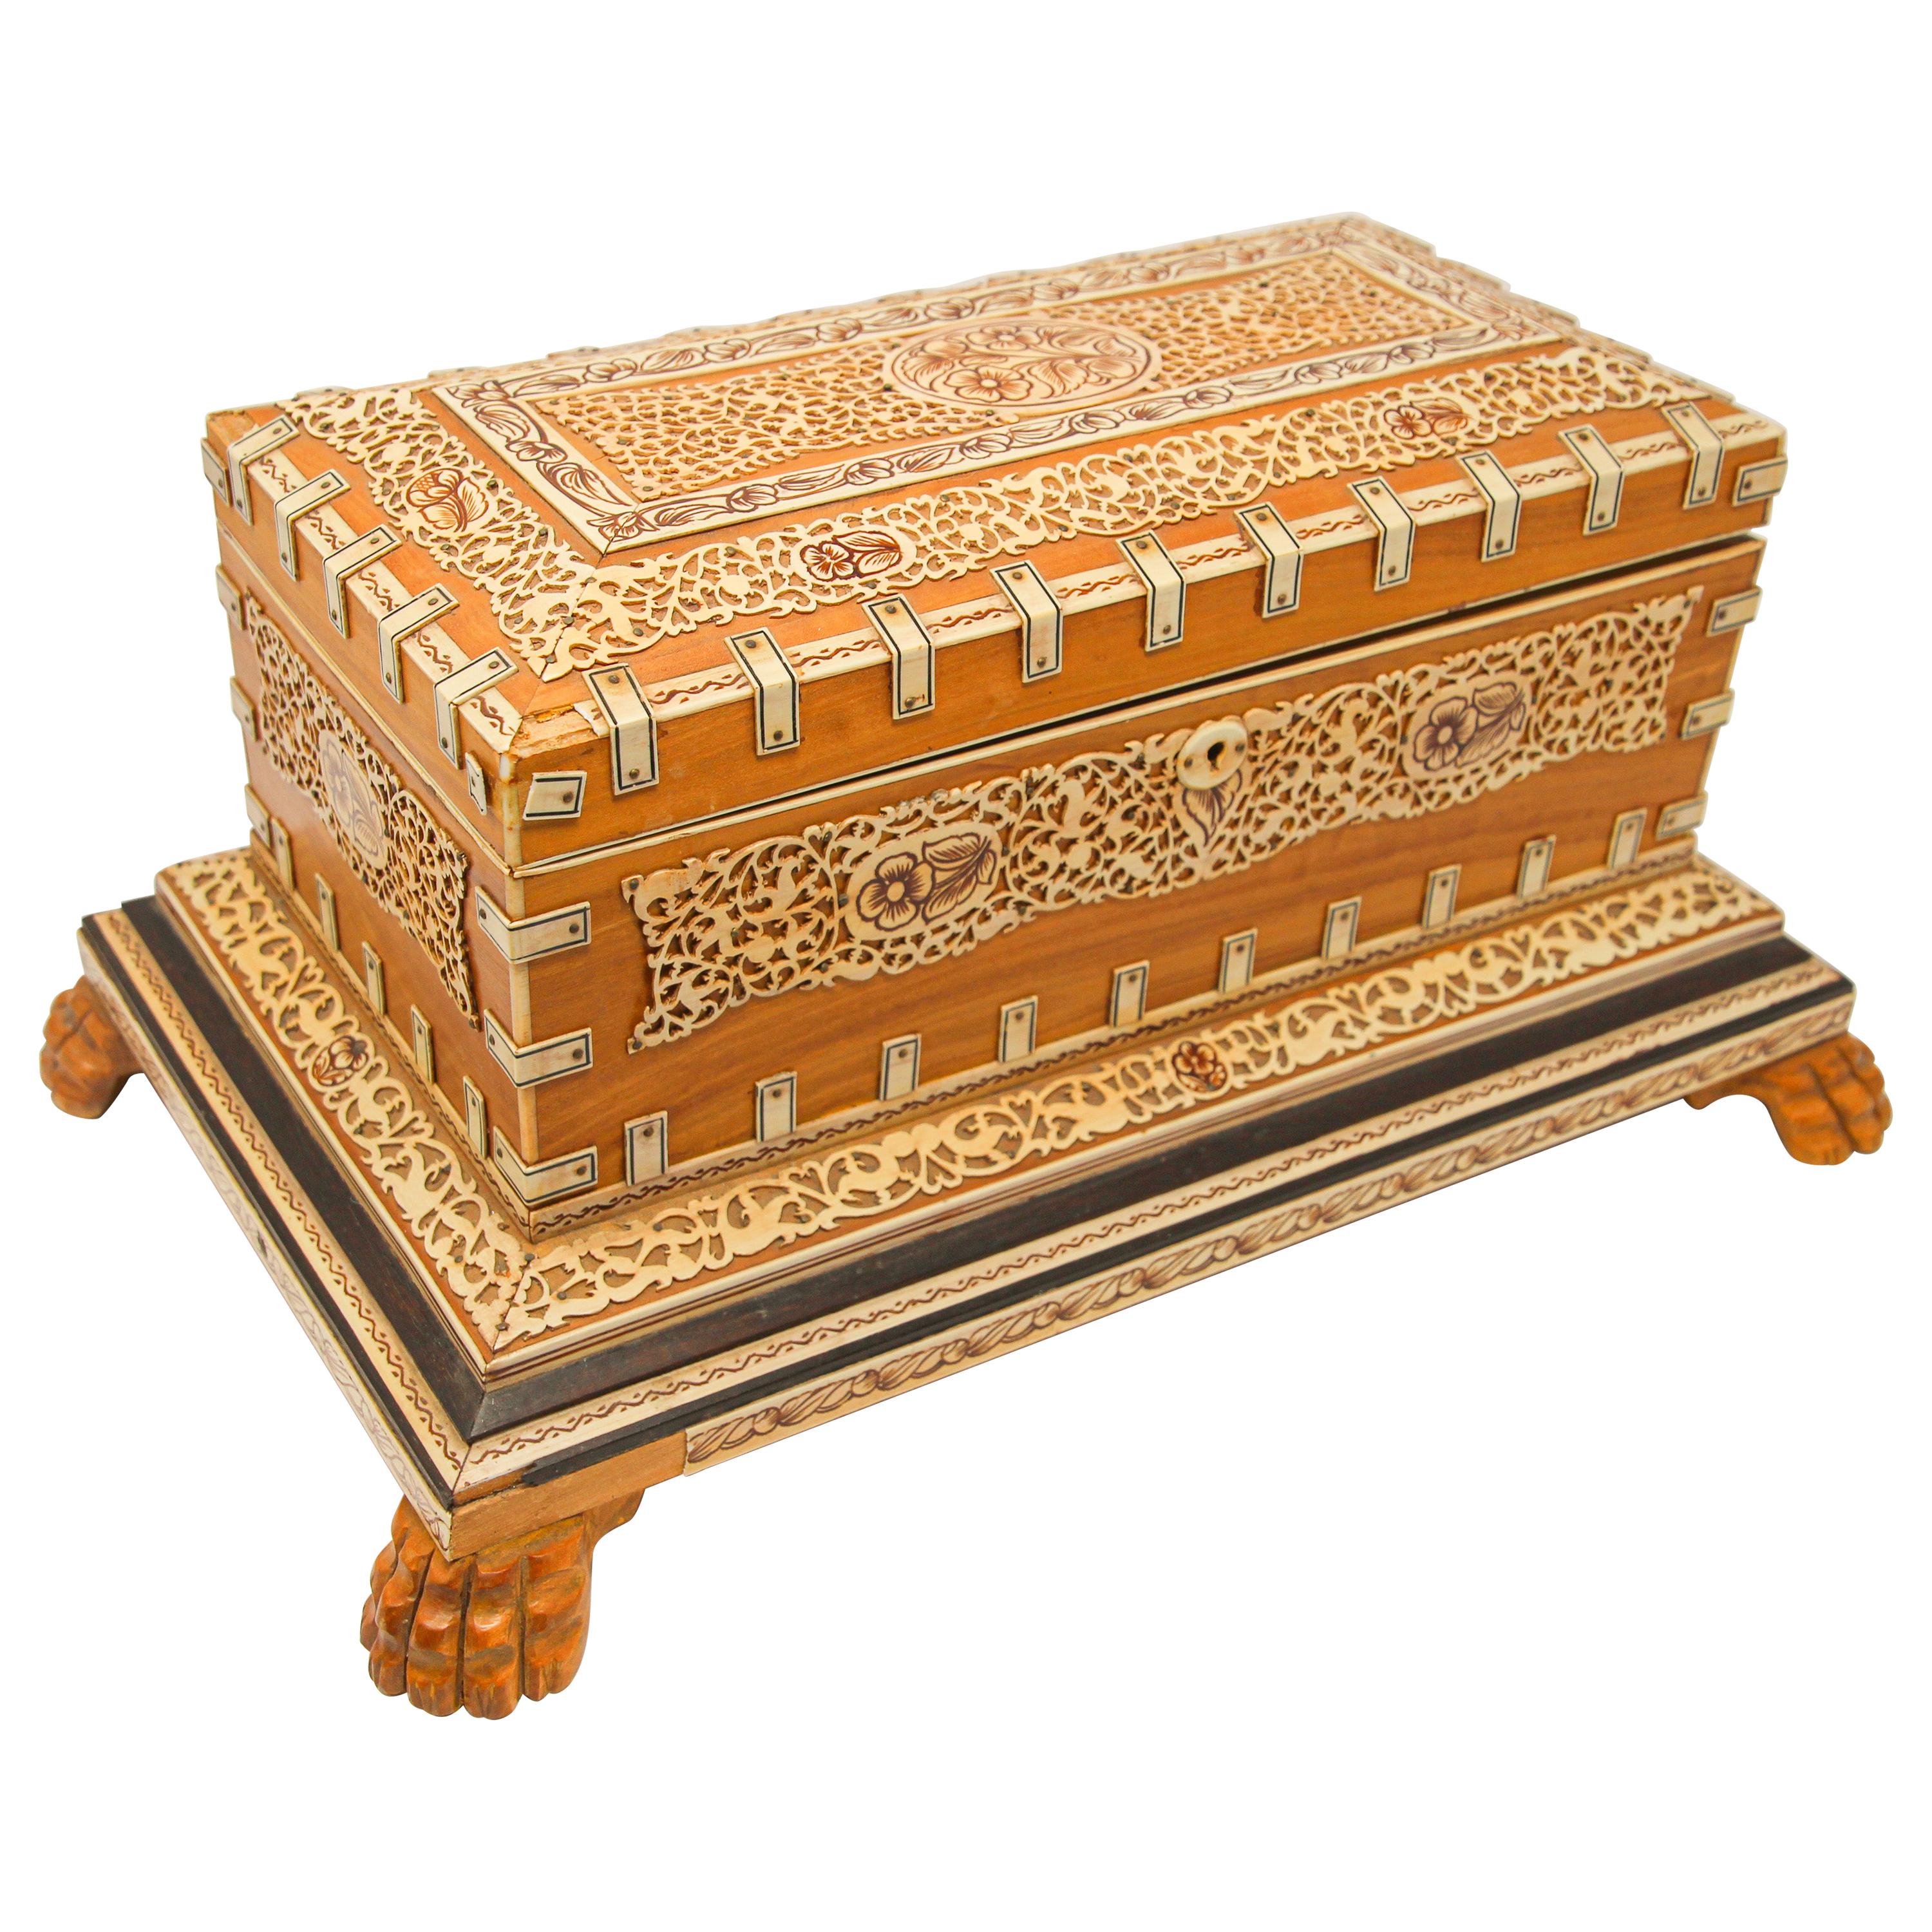 Decorative Anglo-Indian Mughal Style Overlay Footed Box